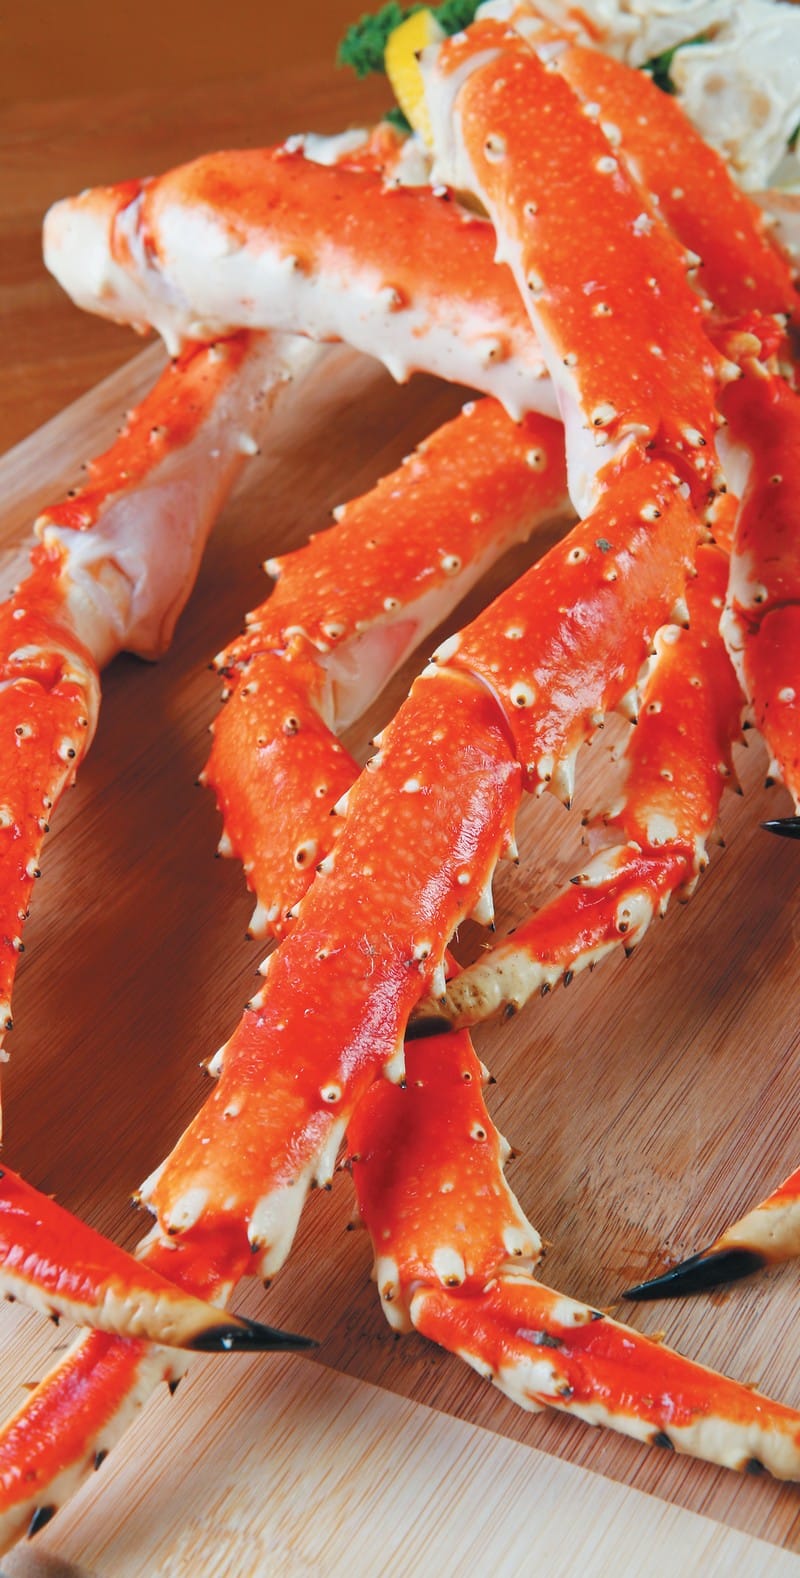 Crab Leg on Wooden Surface Food Picture